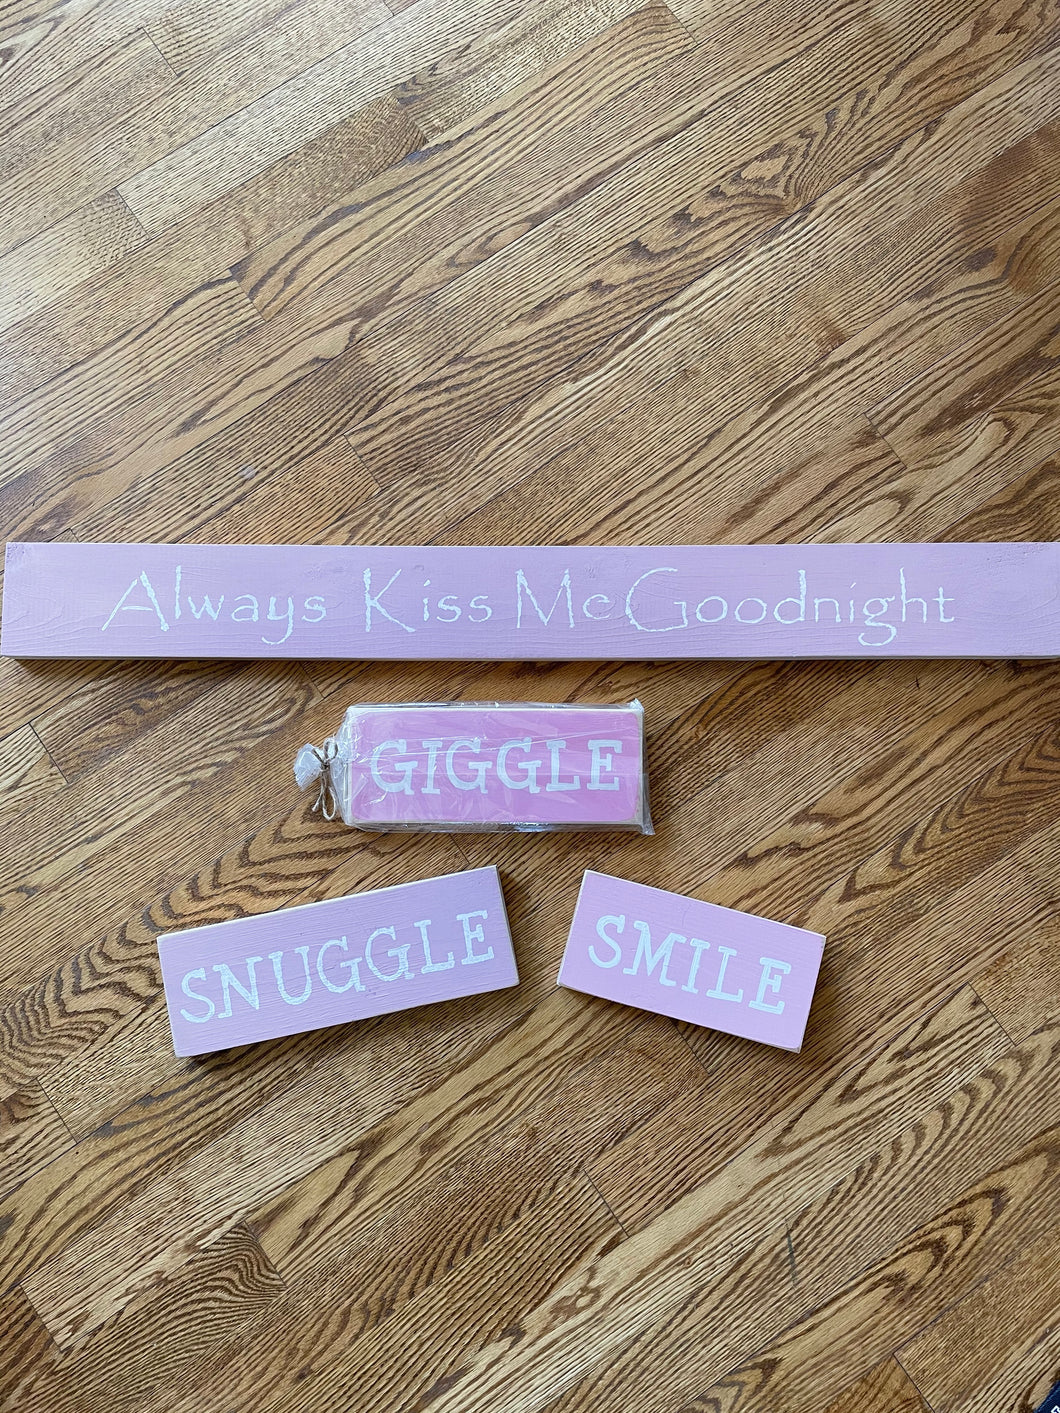 New! 4 Adorable wooden signs in pink hues (Retails $33) - Always Kiss Me Goodnight, Giggle, Snuggle, Smile